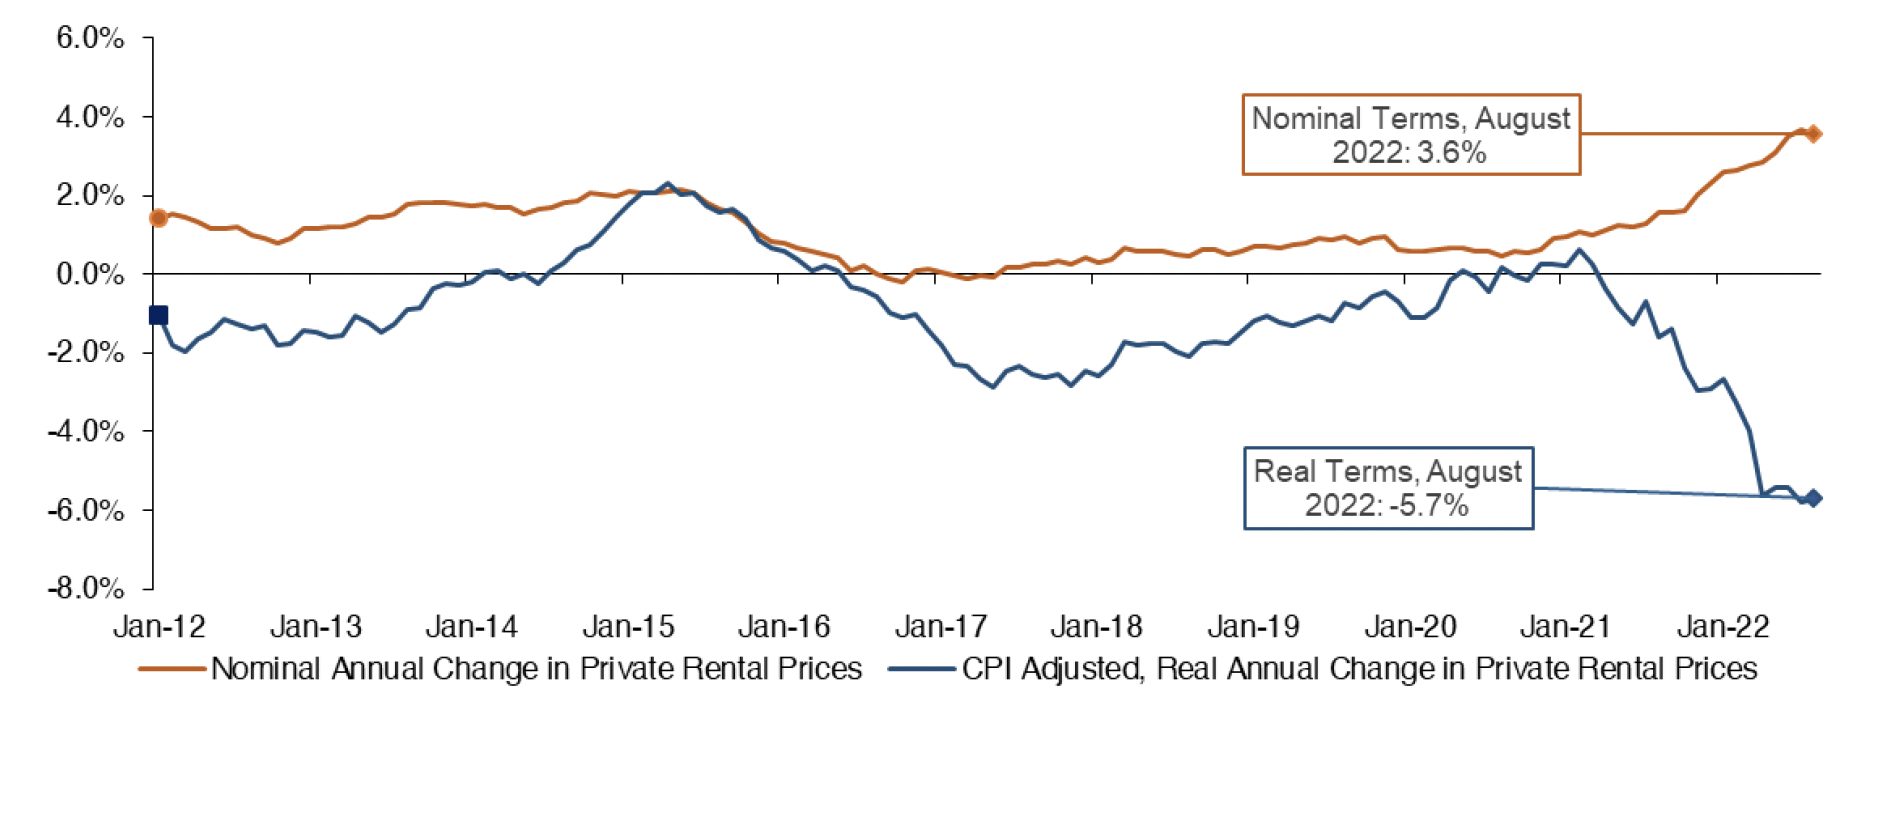 Chart 4.1 shows the annual change in private housing rental prices in Scotland on a monthly basis in both nominal (not accounting for inflation) and in real terms (removing the effect of inflation) from January 2012 to August 2022. 